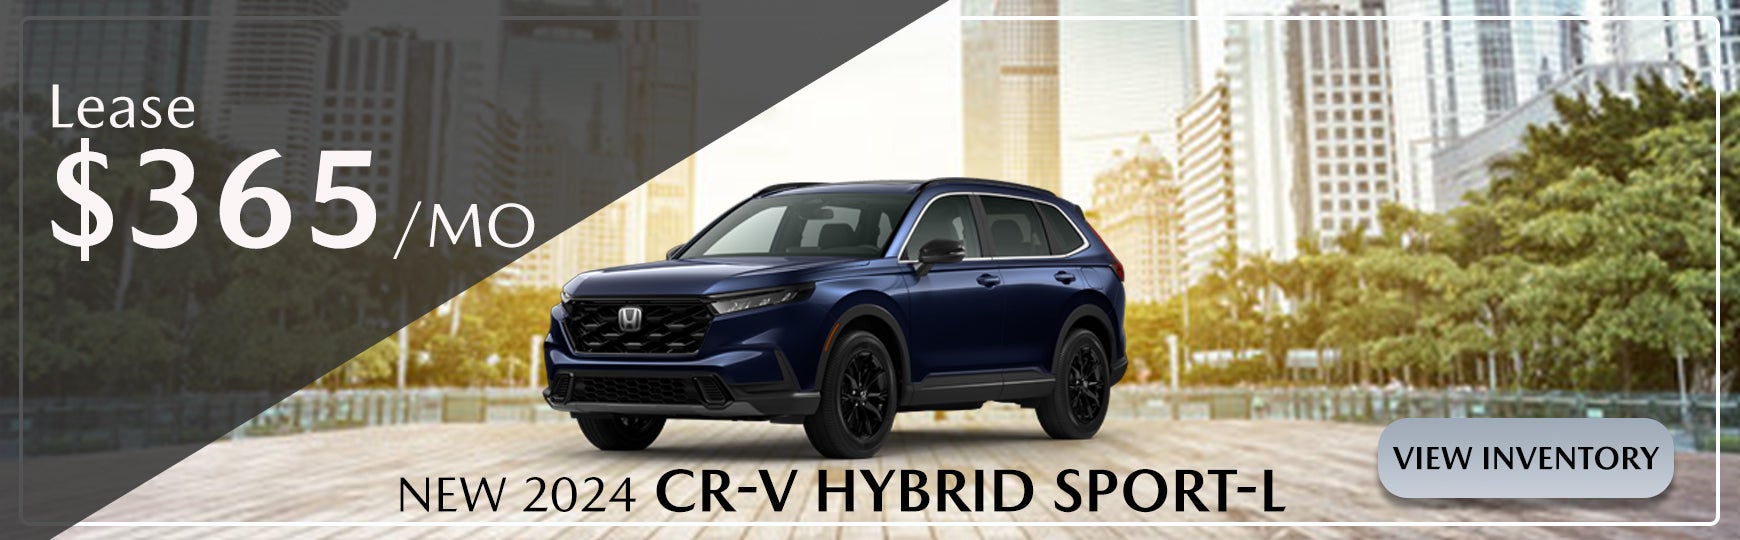 NEW CR-V LEASE SPECIAL